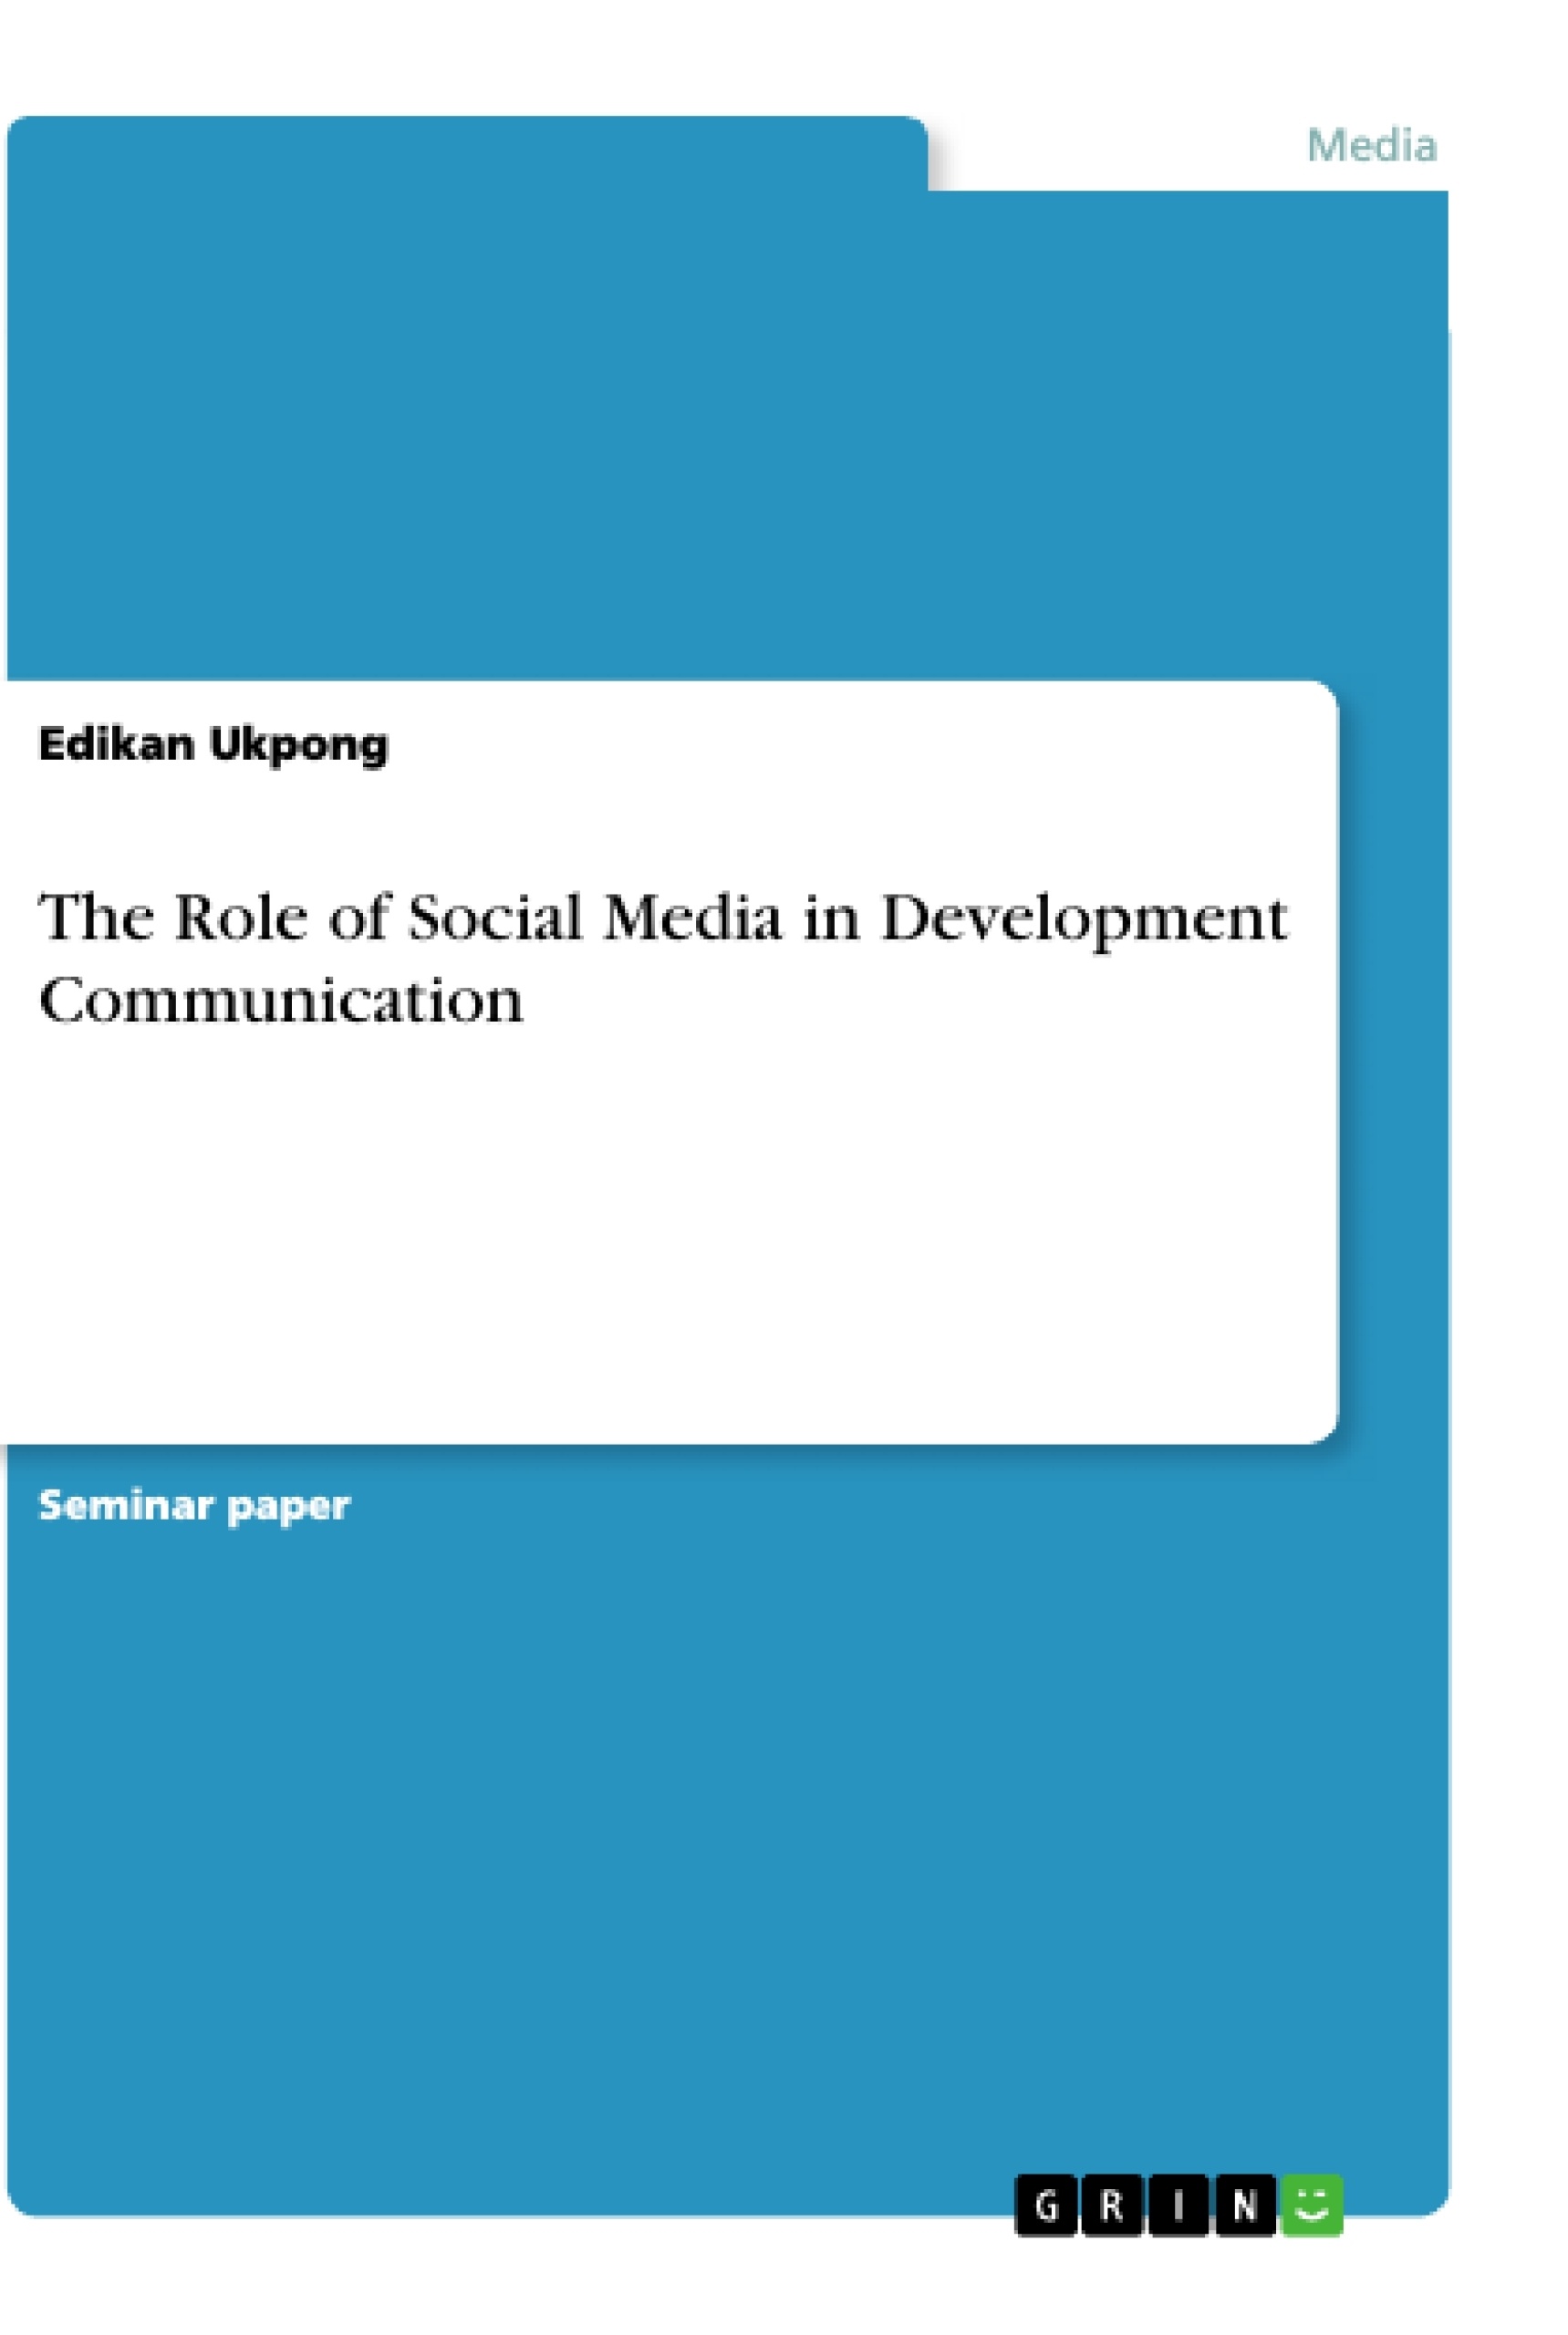 Title: The Role of Social Media in Development Communication